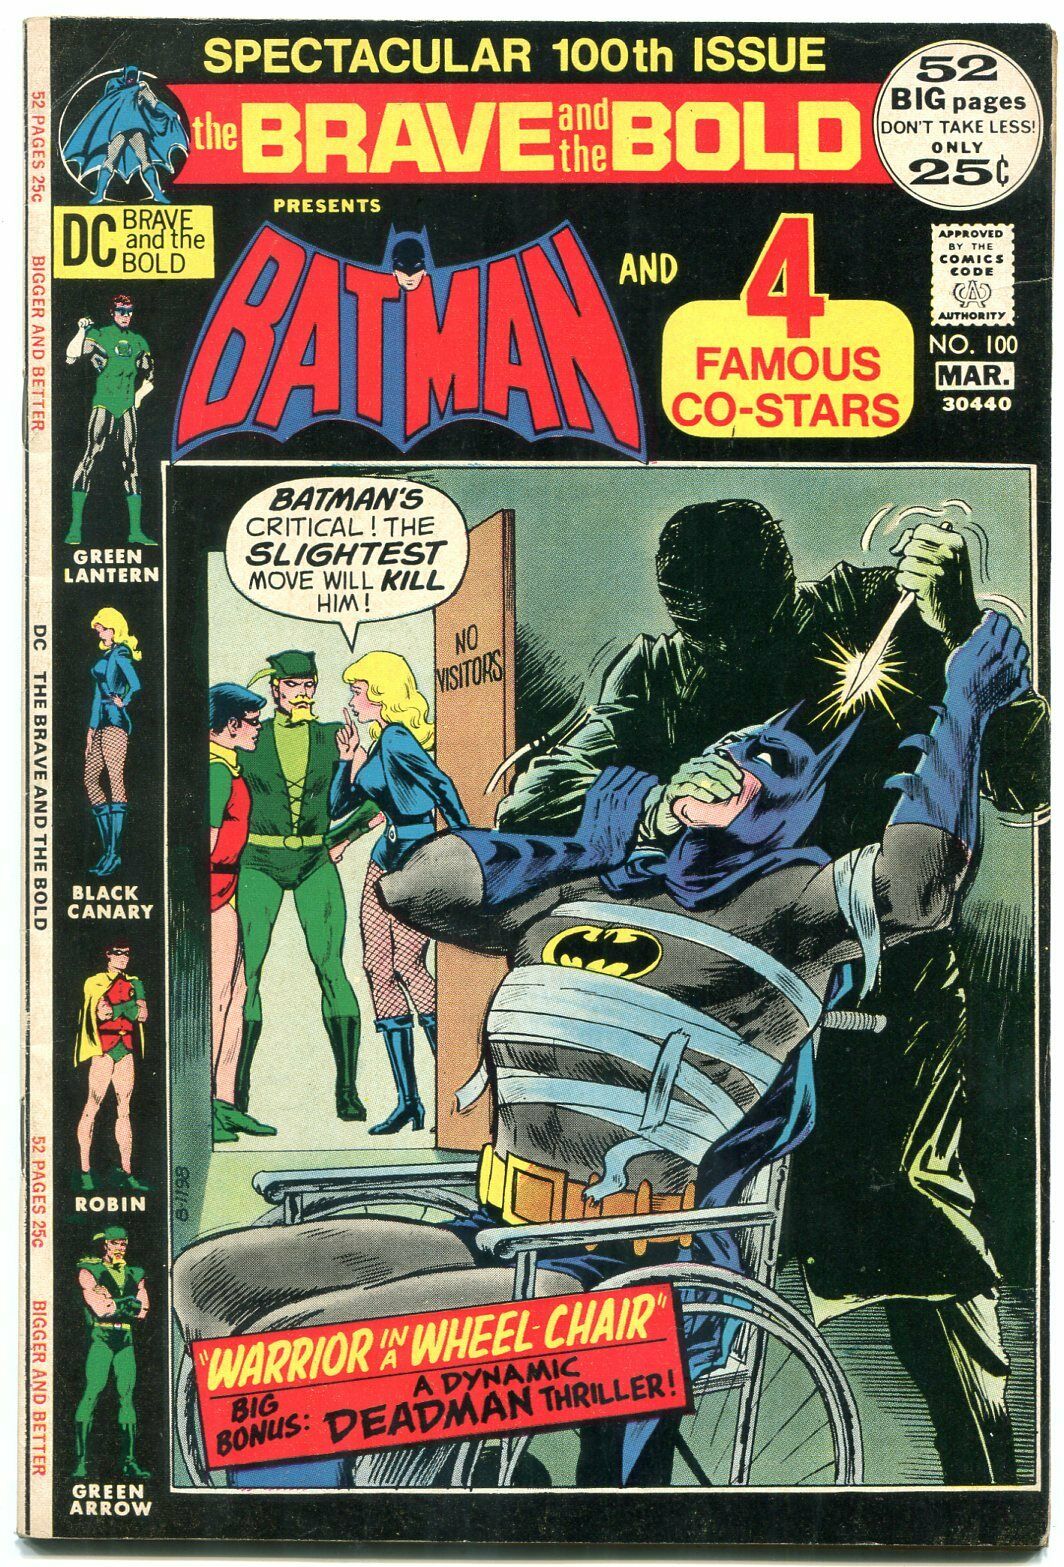 The Brave and the Bold, Vol 28 #185 (Comic Book): Batman and Green Arrow:  DC COMICS: : Books